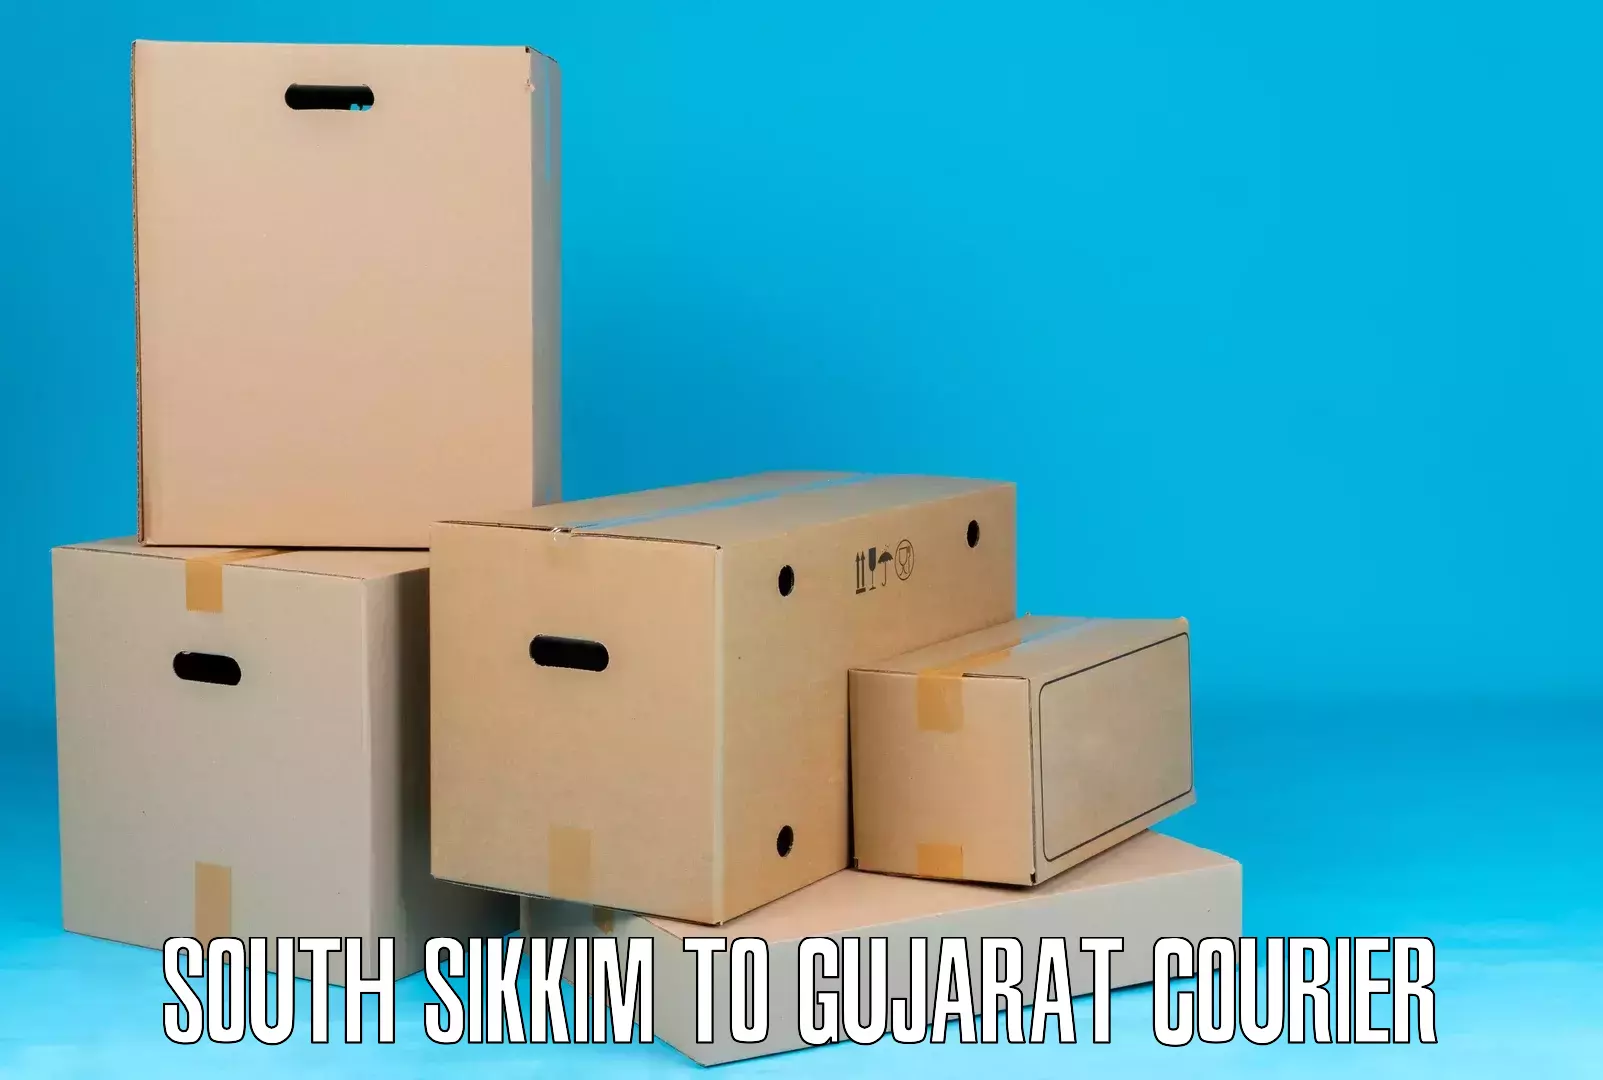 Customer-focused courier South Sikkim to Ahmedabad